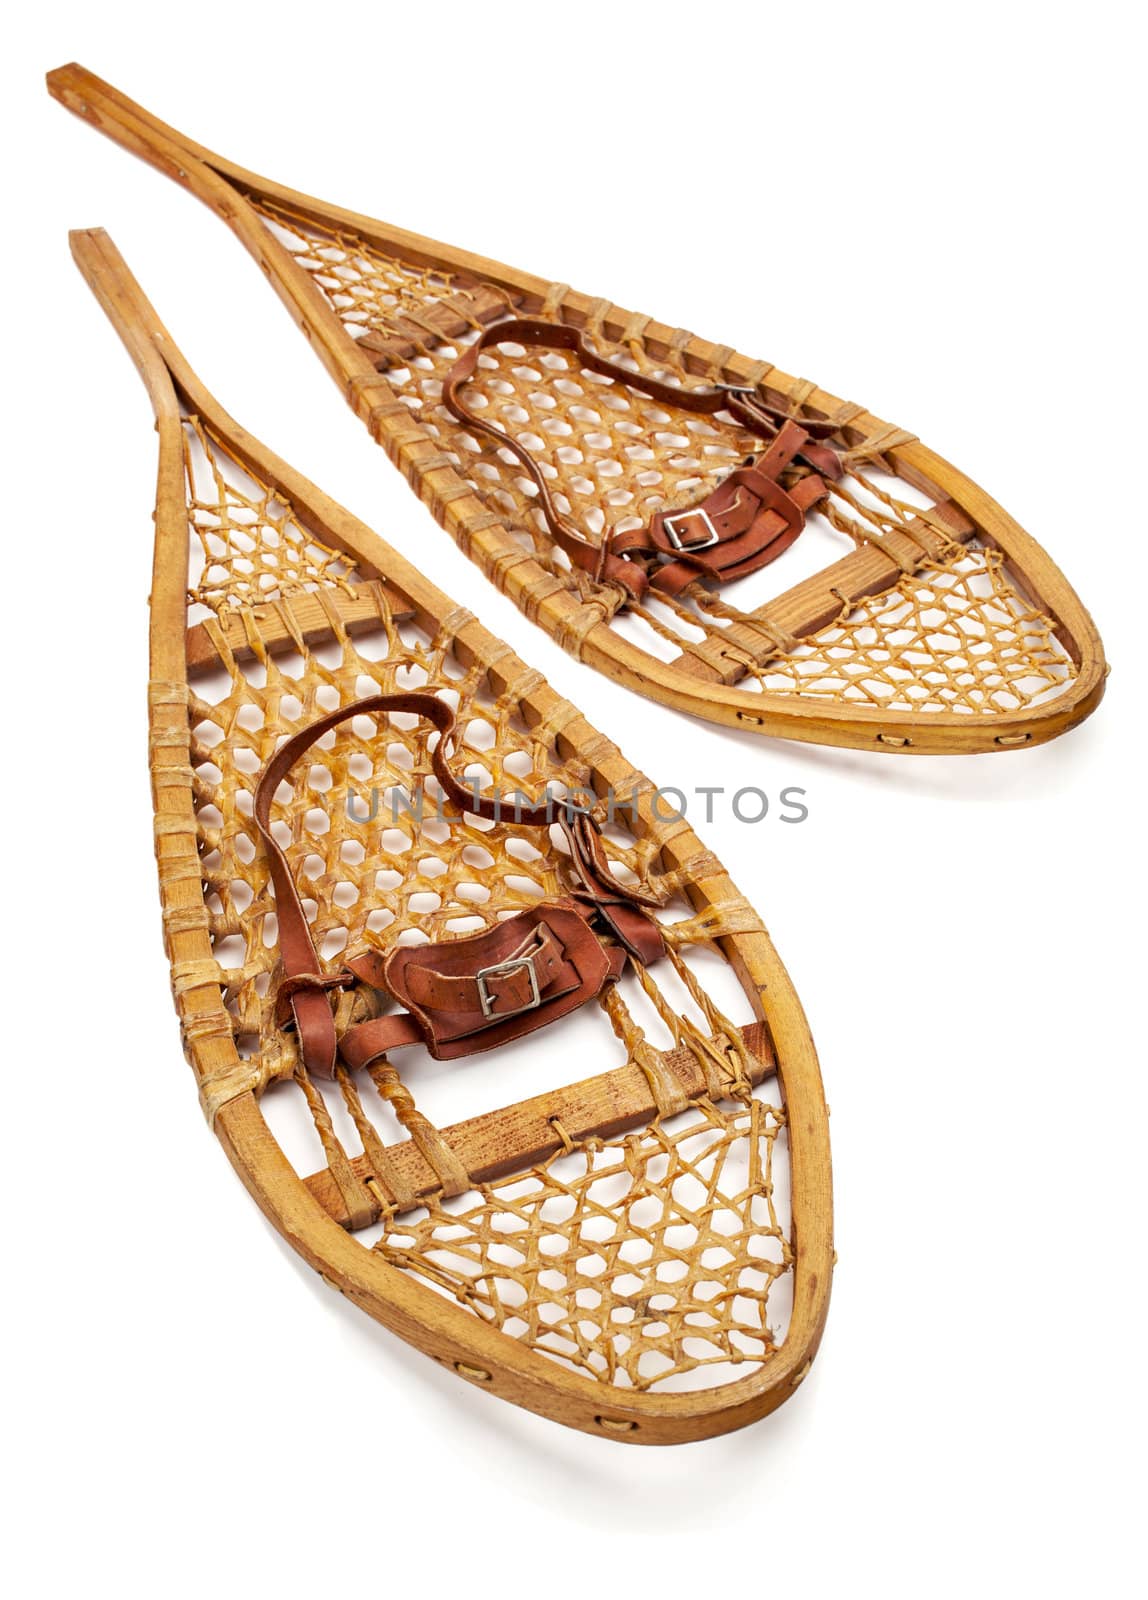 vintage wooden Huron snowshoes with leather binding on white